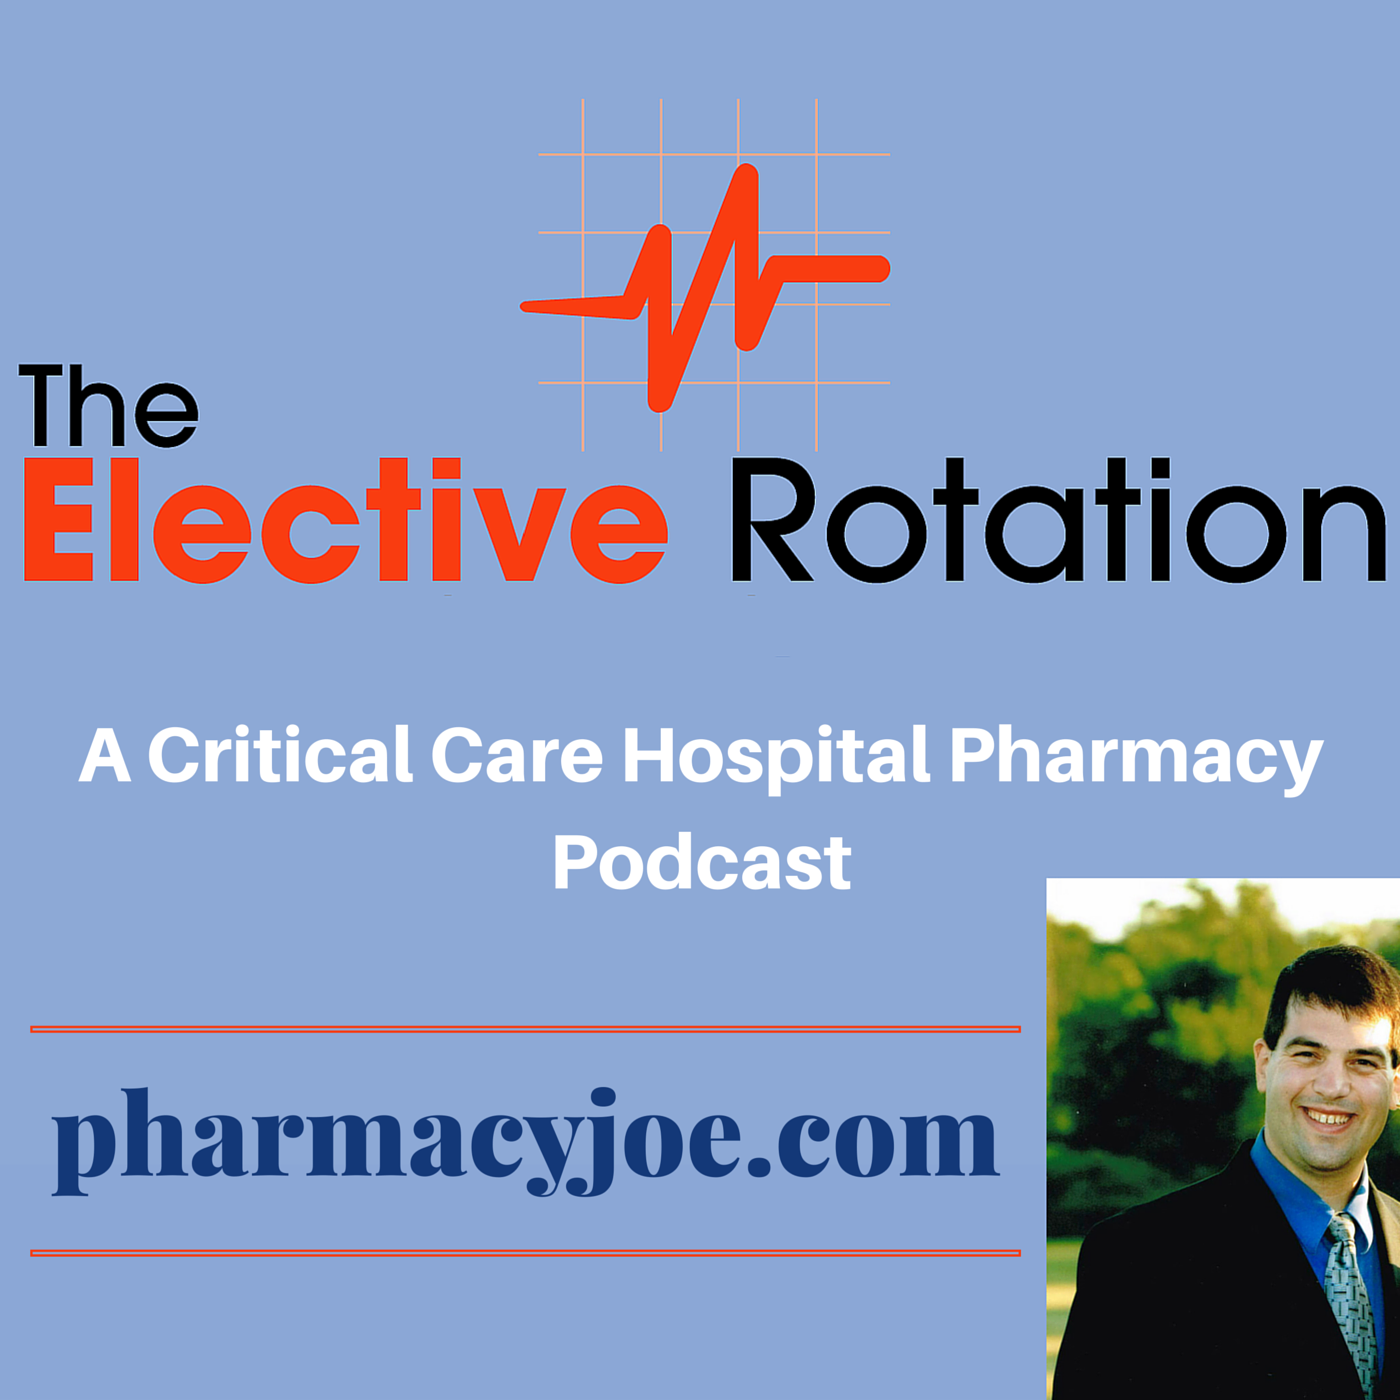 893: Should Fludrocortisone Always Be Added to Hydrocortisone in Patients With Septic Shock?